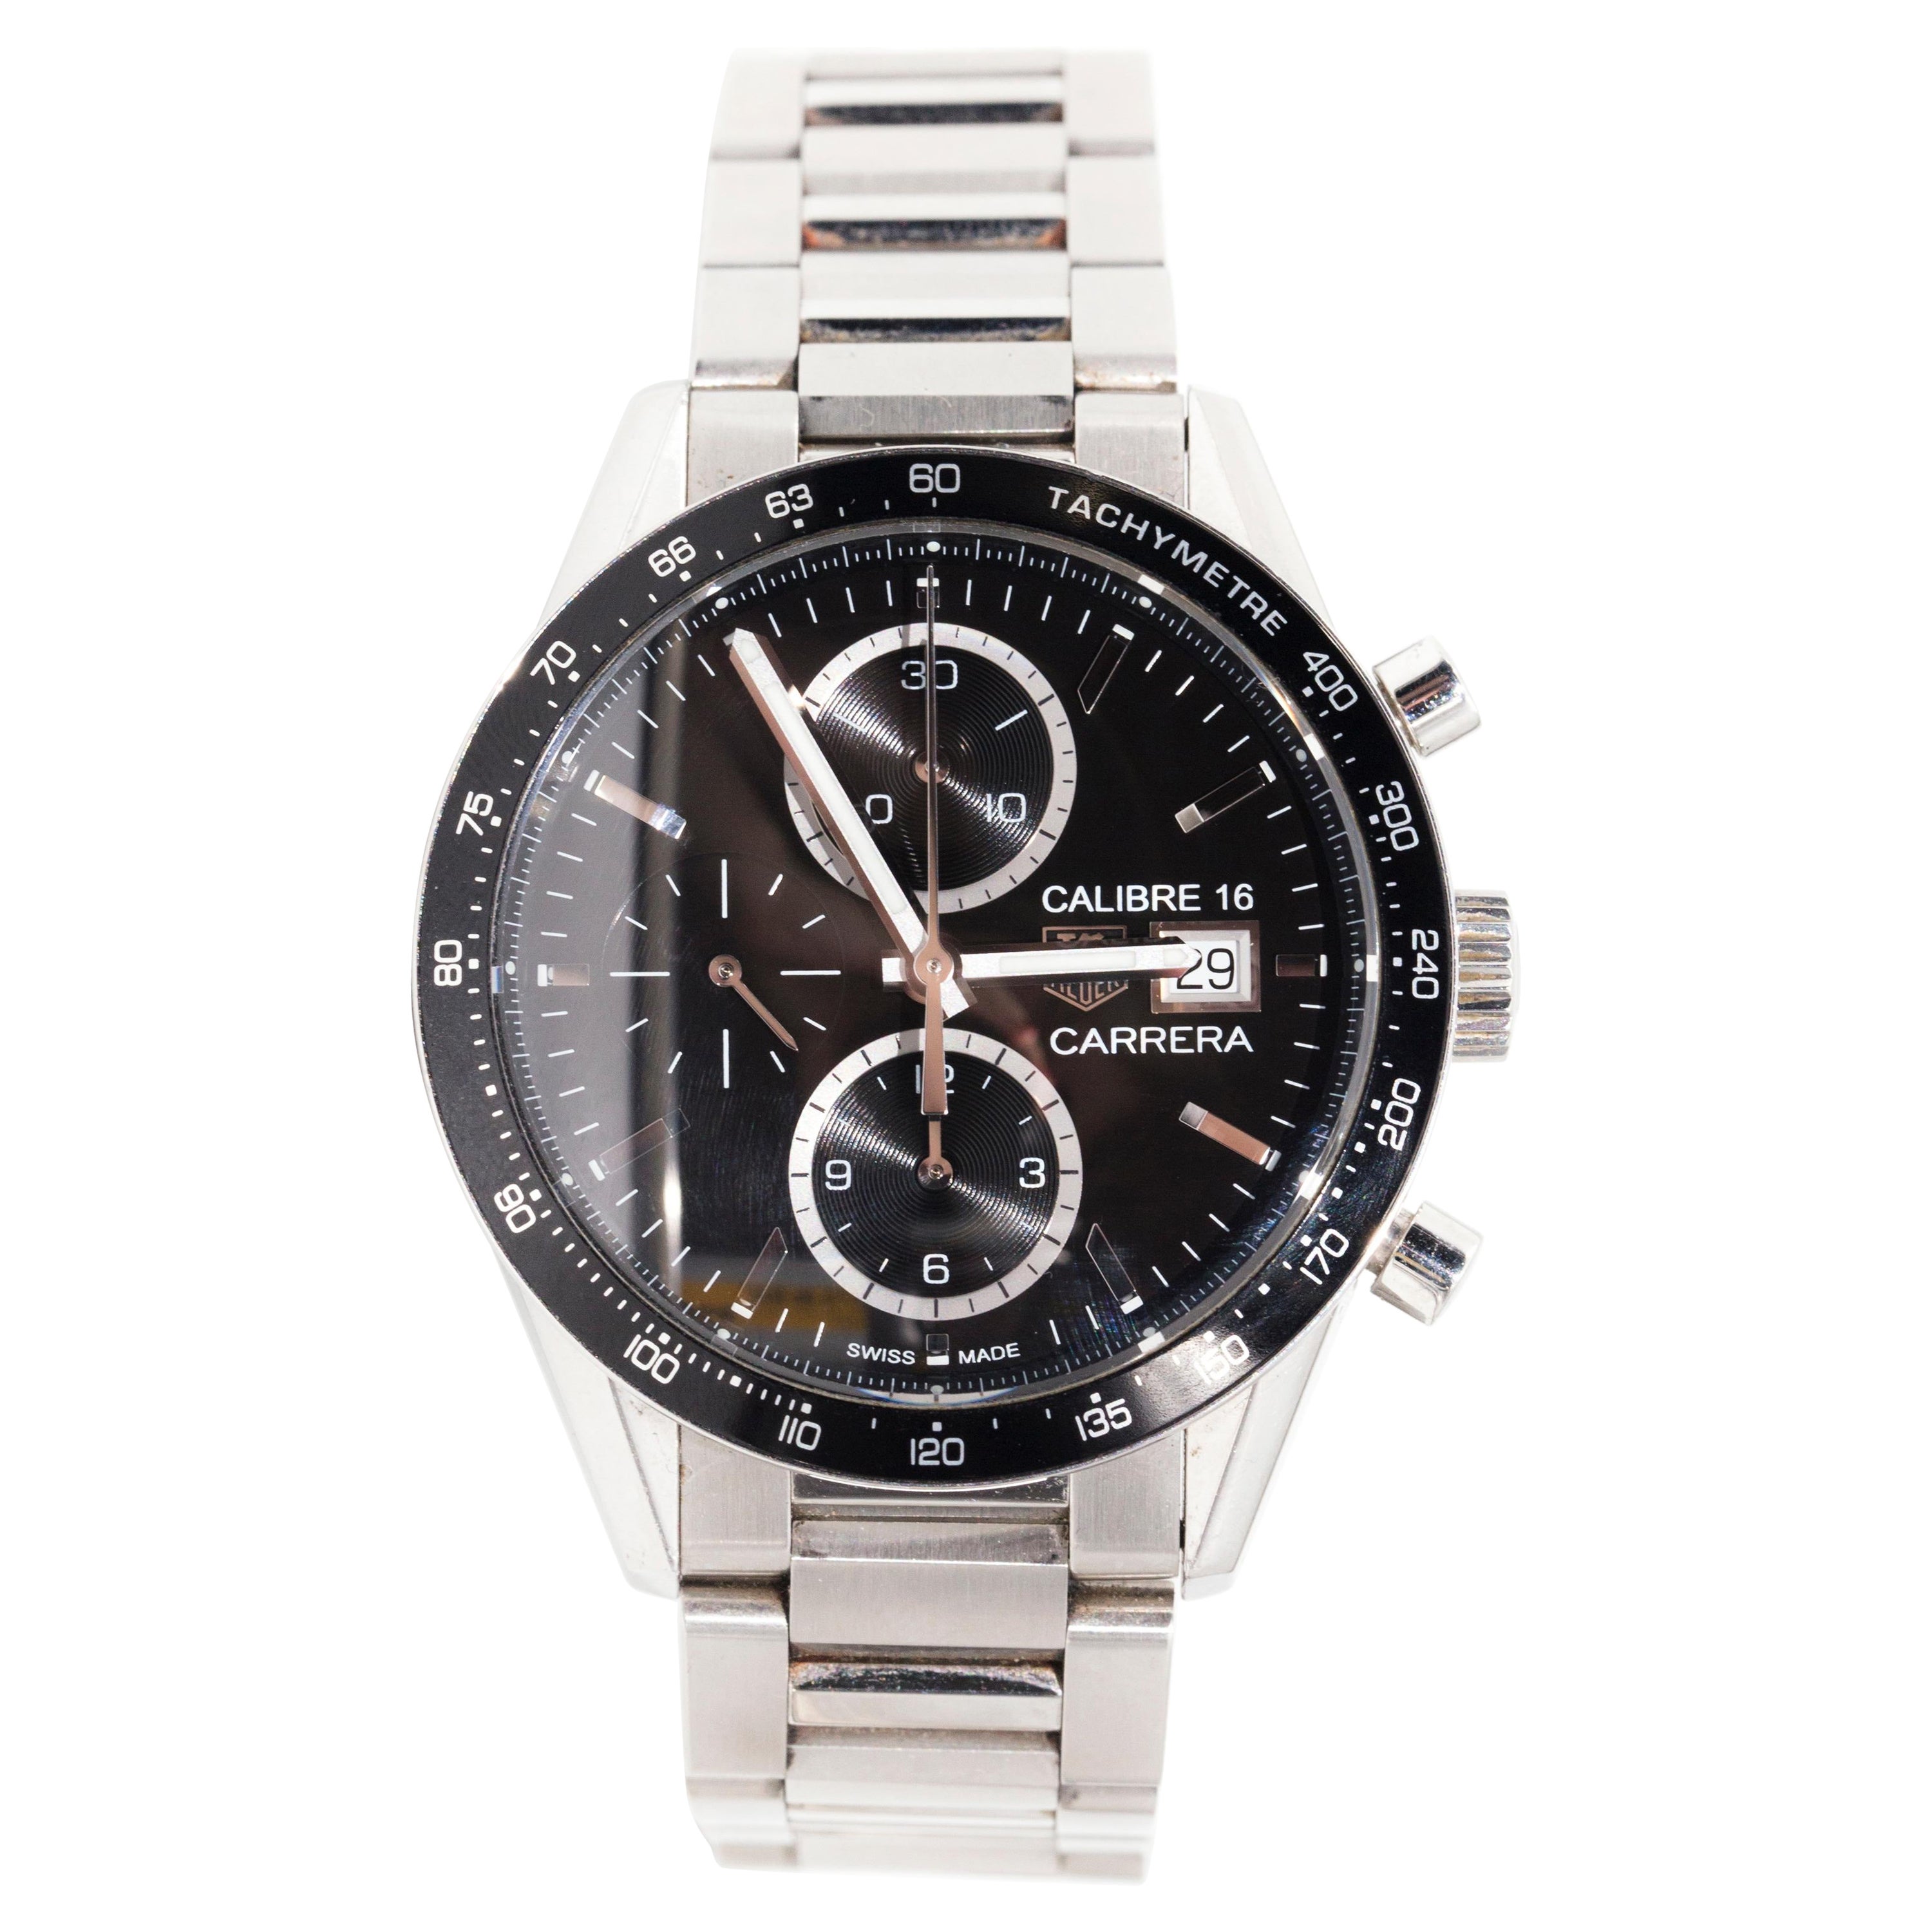 TAG Heuer Carrera Calibre 16 Men's Watch Stainless Steel Sports